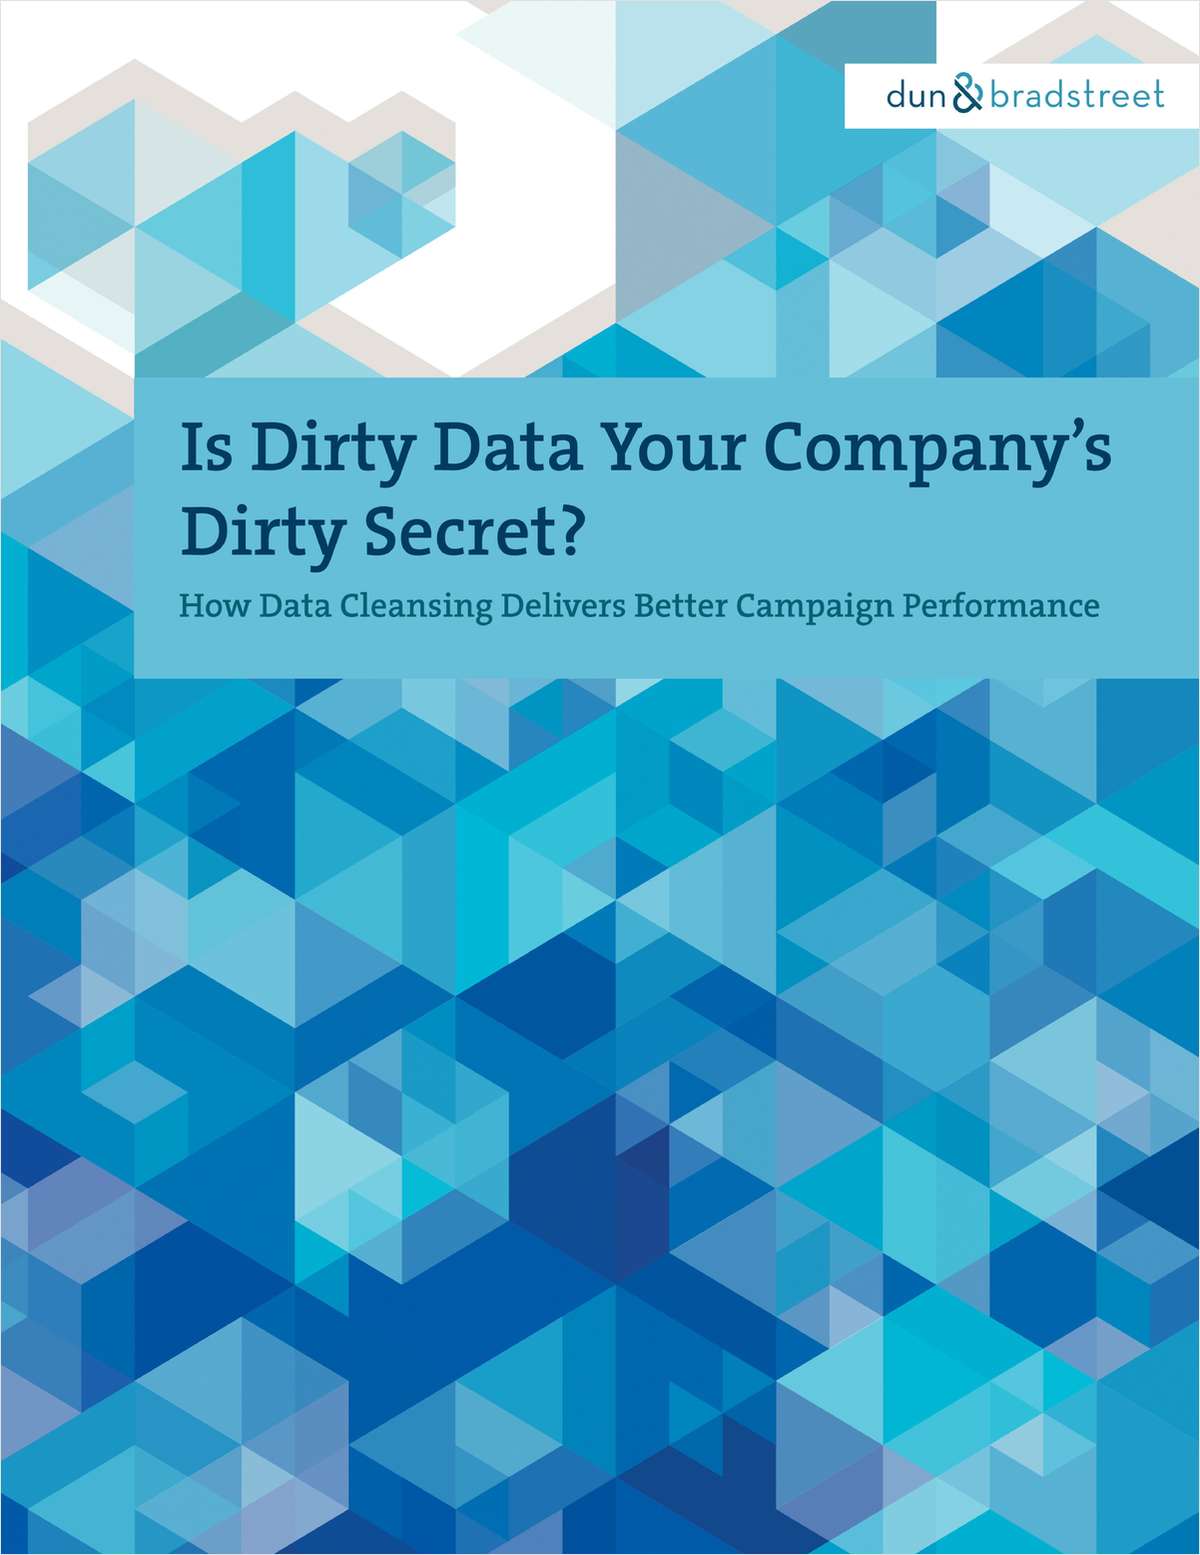 Is Dirty Data Your Company's Dirty Secret?